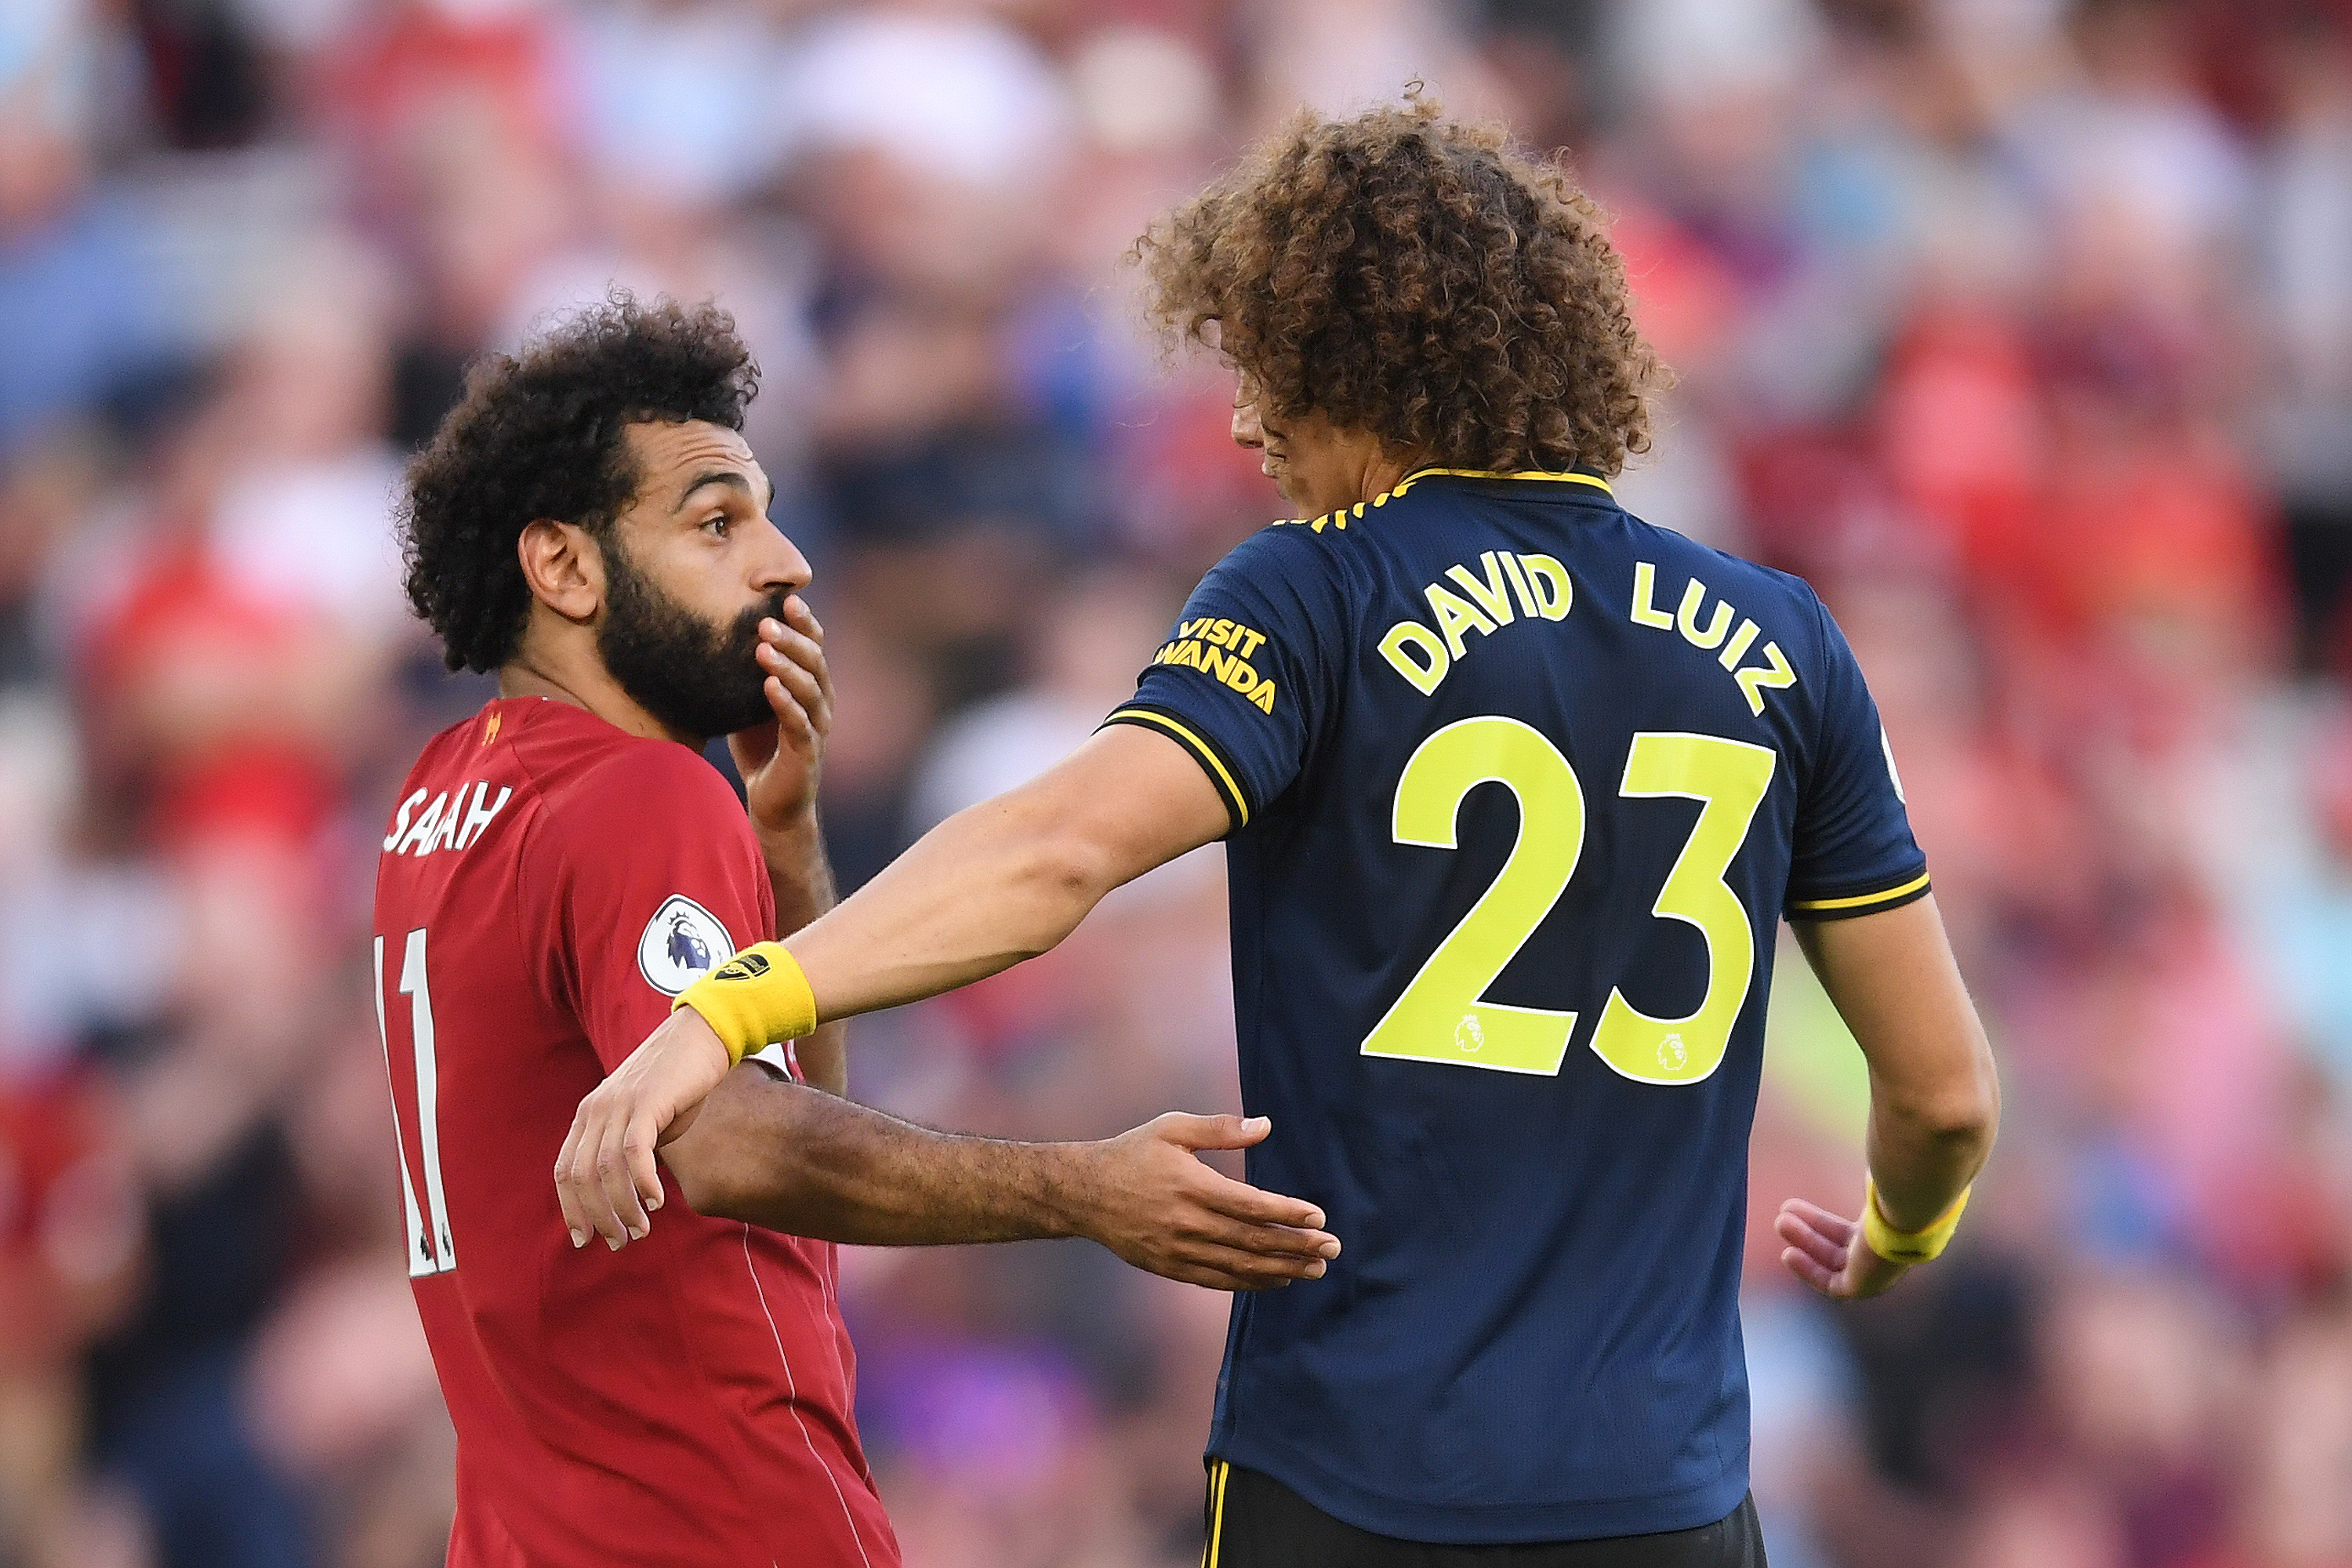 Luiz completely struggled to make his mark against Liverpool and Salah. (Photo by Laurence Griffiths/Getty Images)